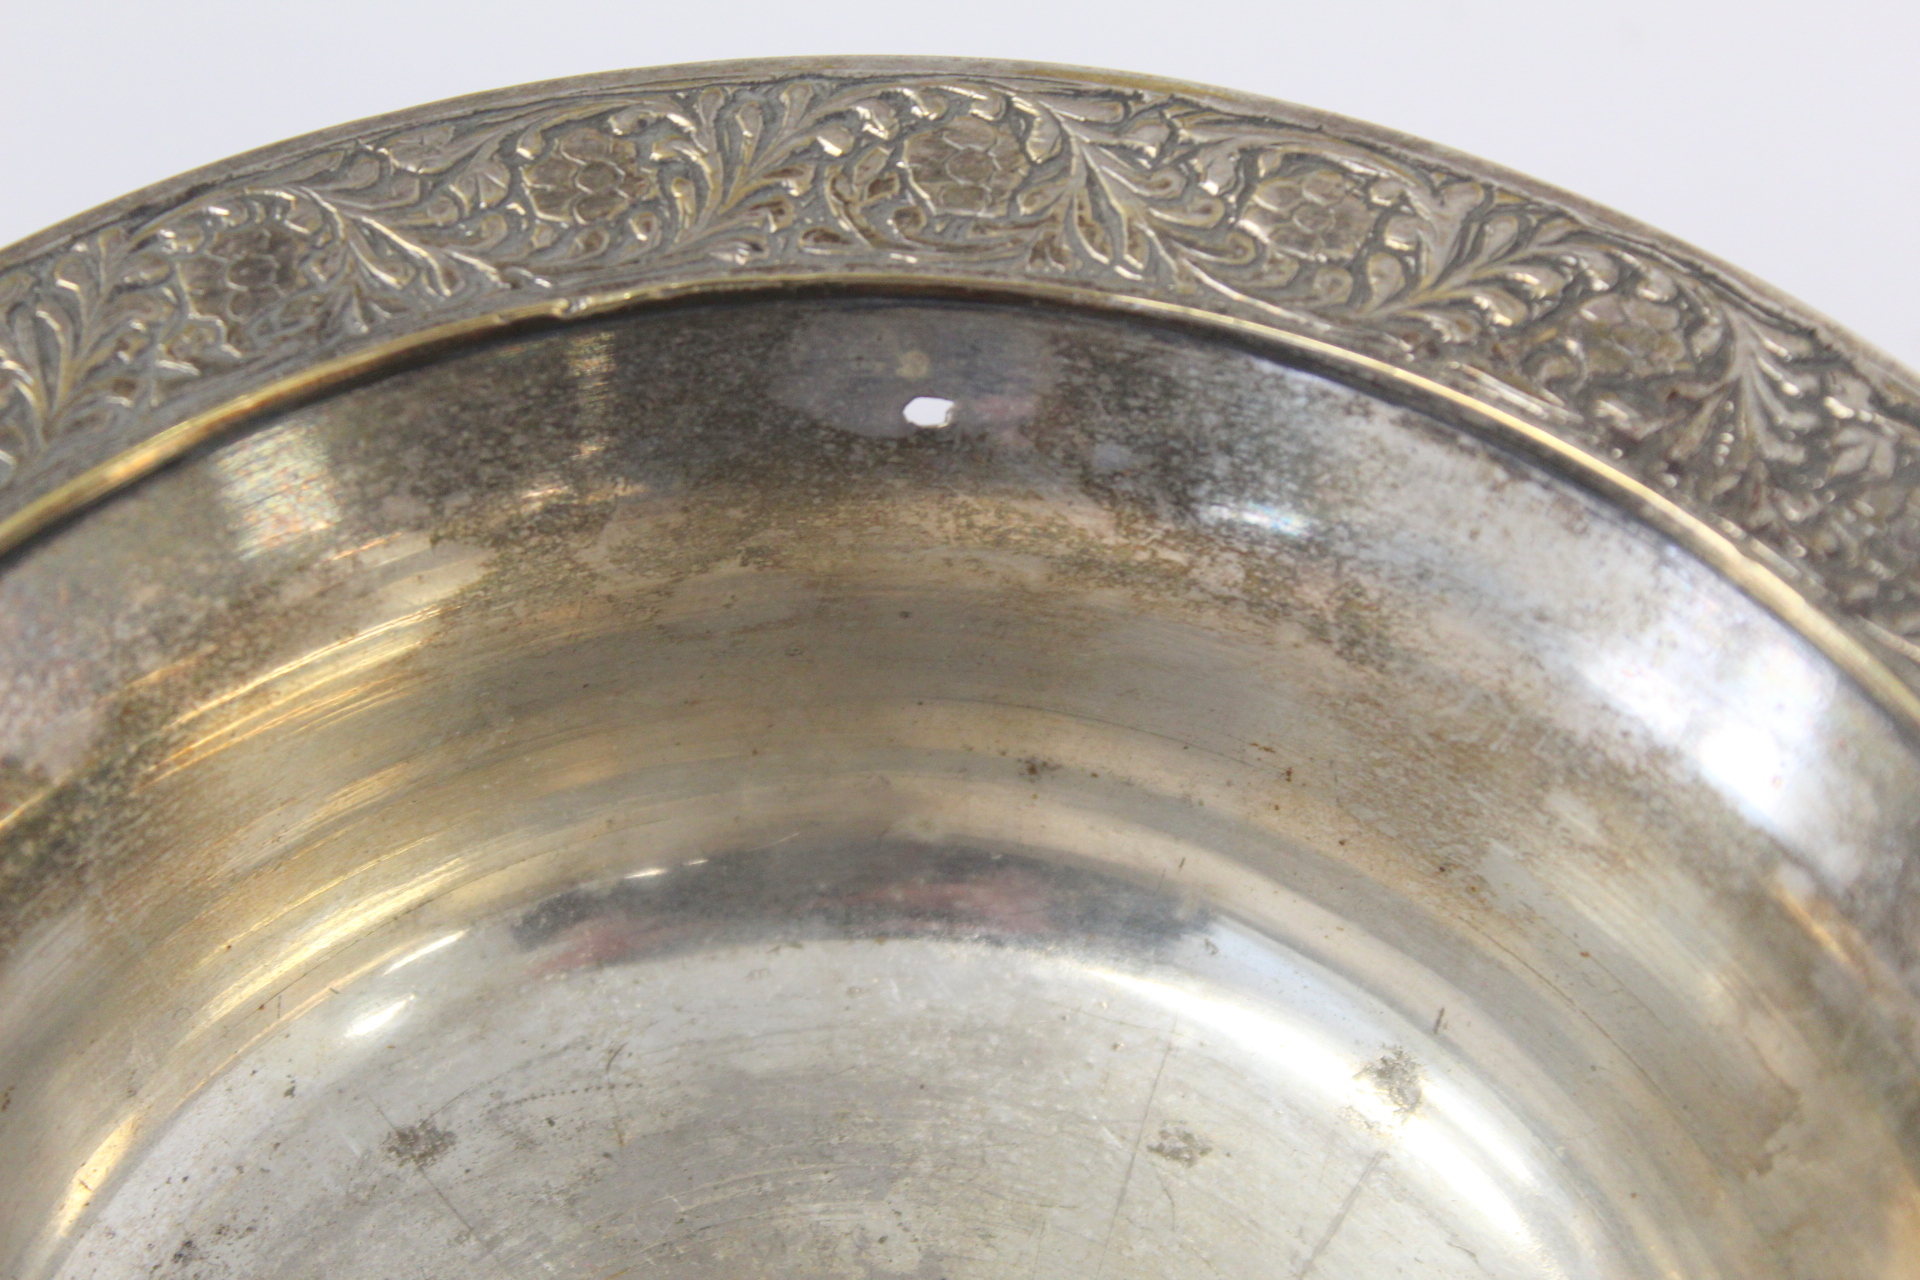 Oriental silvered circular brass bowl with engraved floral and foliate decoration, 16cm diam. - Image 6 of 9